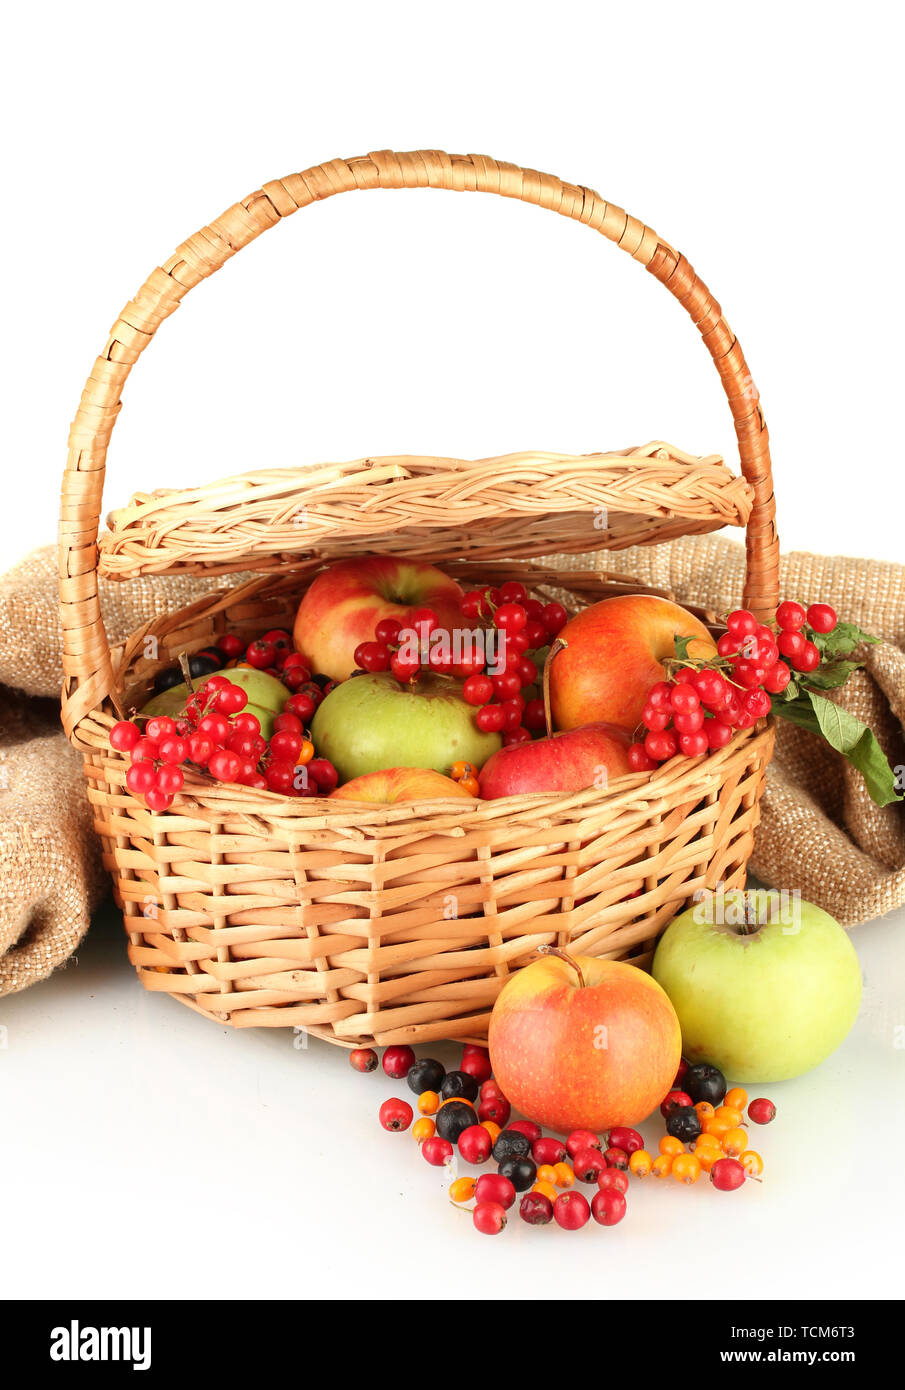 crop of berries and fruits in a basket on white background close-up Stock Photo